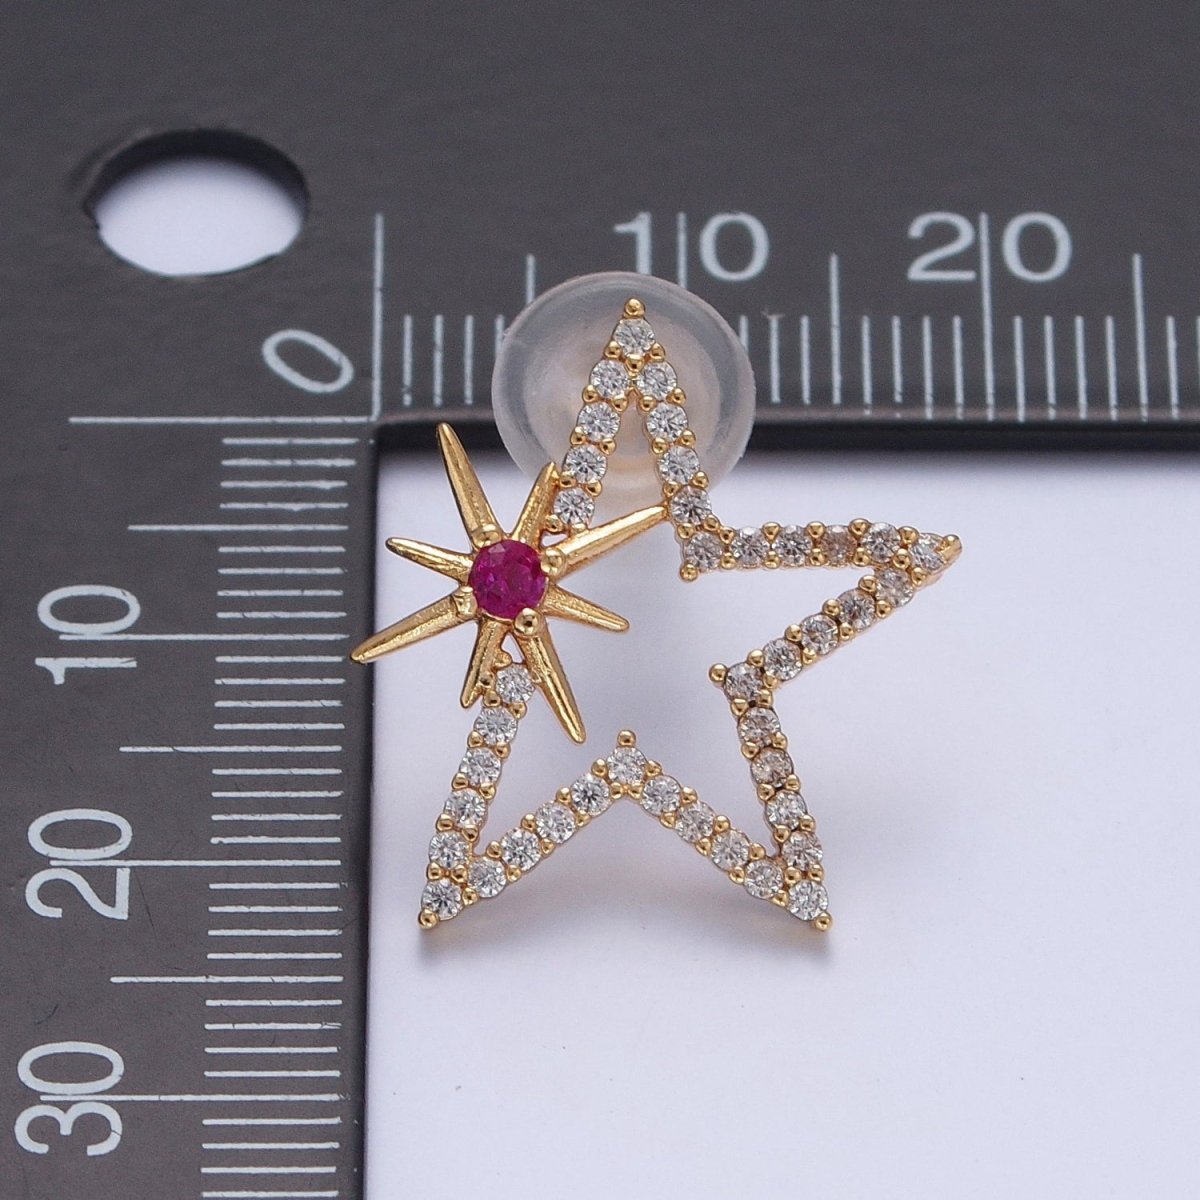 24K Gold Filled Clear Fuchsia Micro Pave Celestial Star Stud Earrings P-321 - DLUXCA